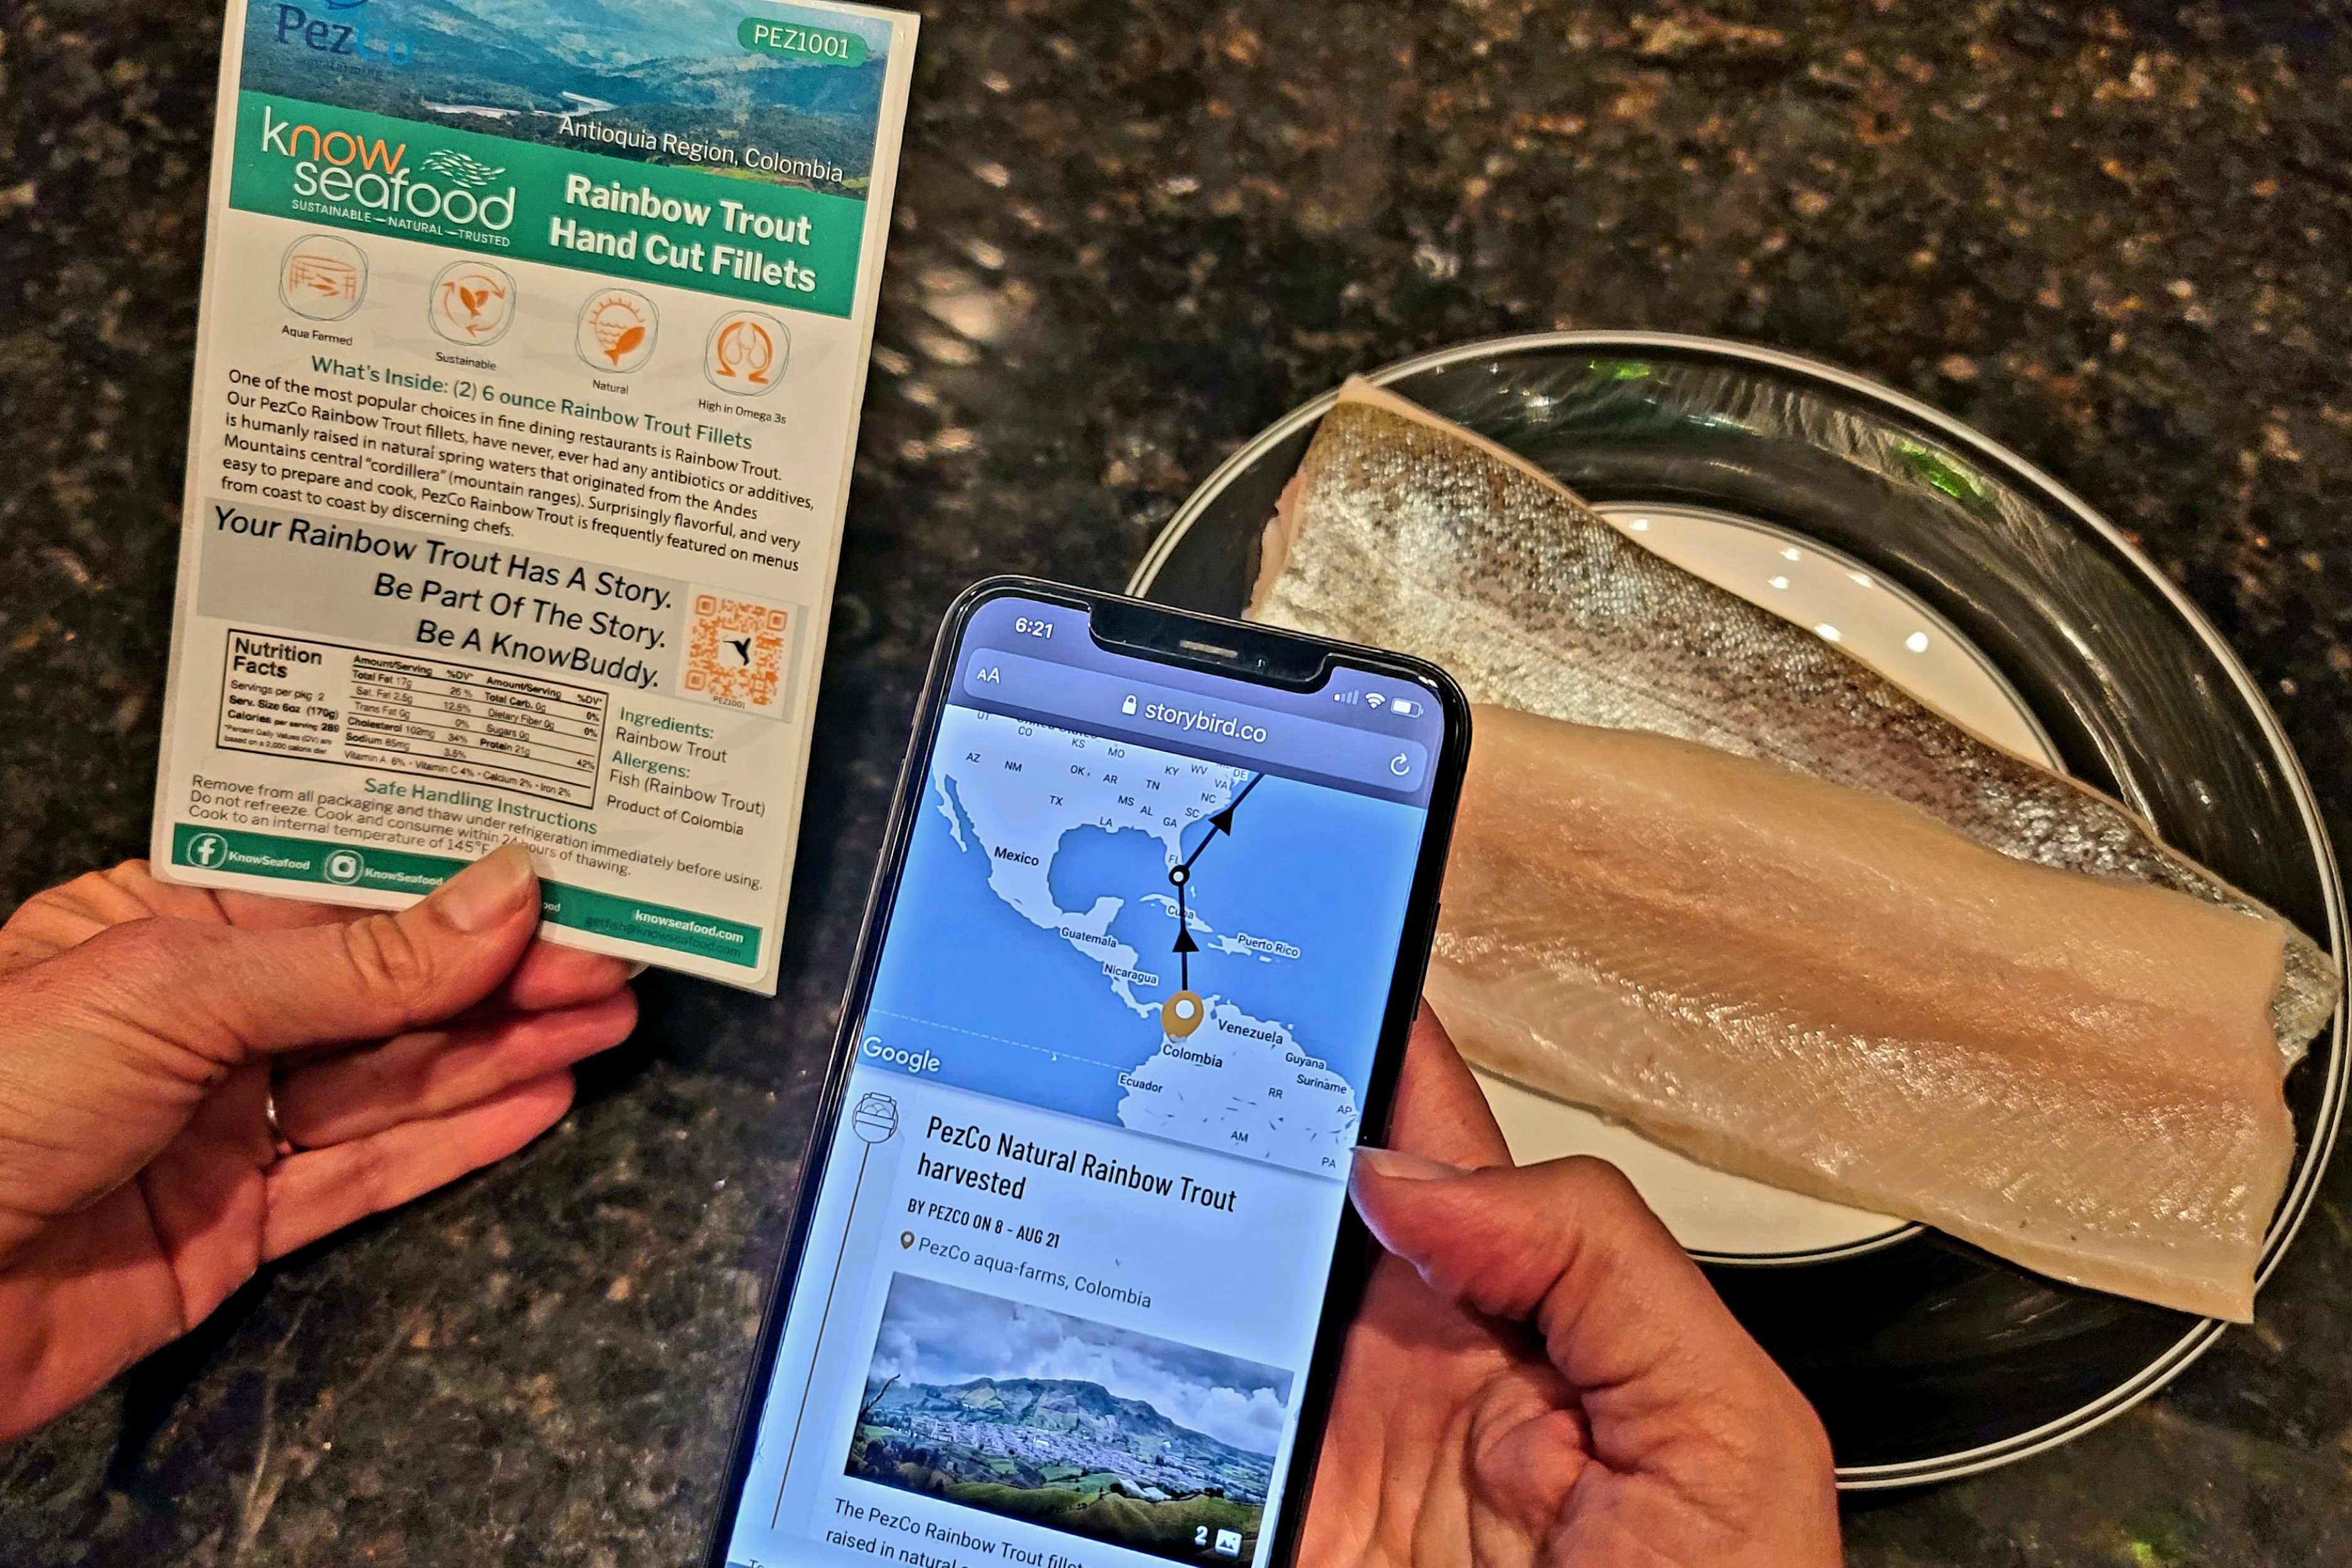 KnowSeafood customers can trace every step of their seafood's journey from ocean to the front door through the innovative use of blockchain technology paired with Storybird supply chain transparency application software. Interactive maps and photos show exactly when, where, and how this Rainbow Trout was caught and shipped. 